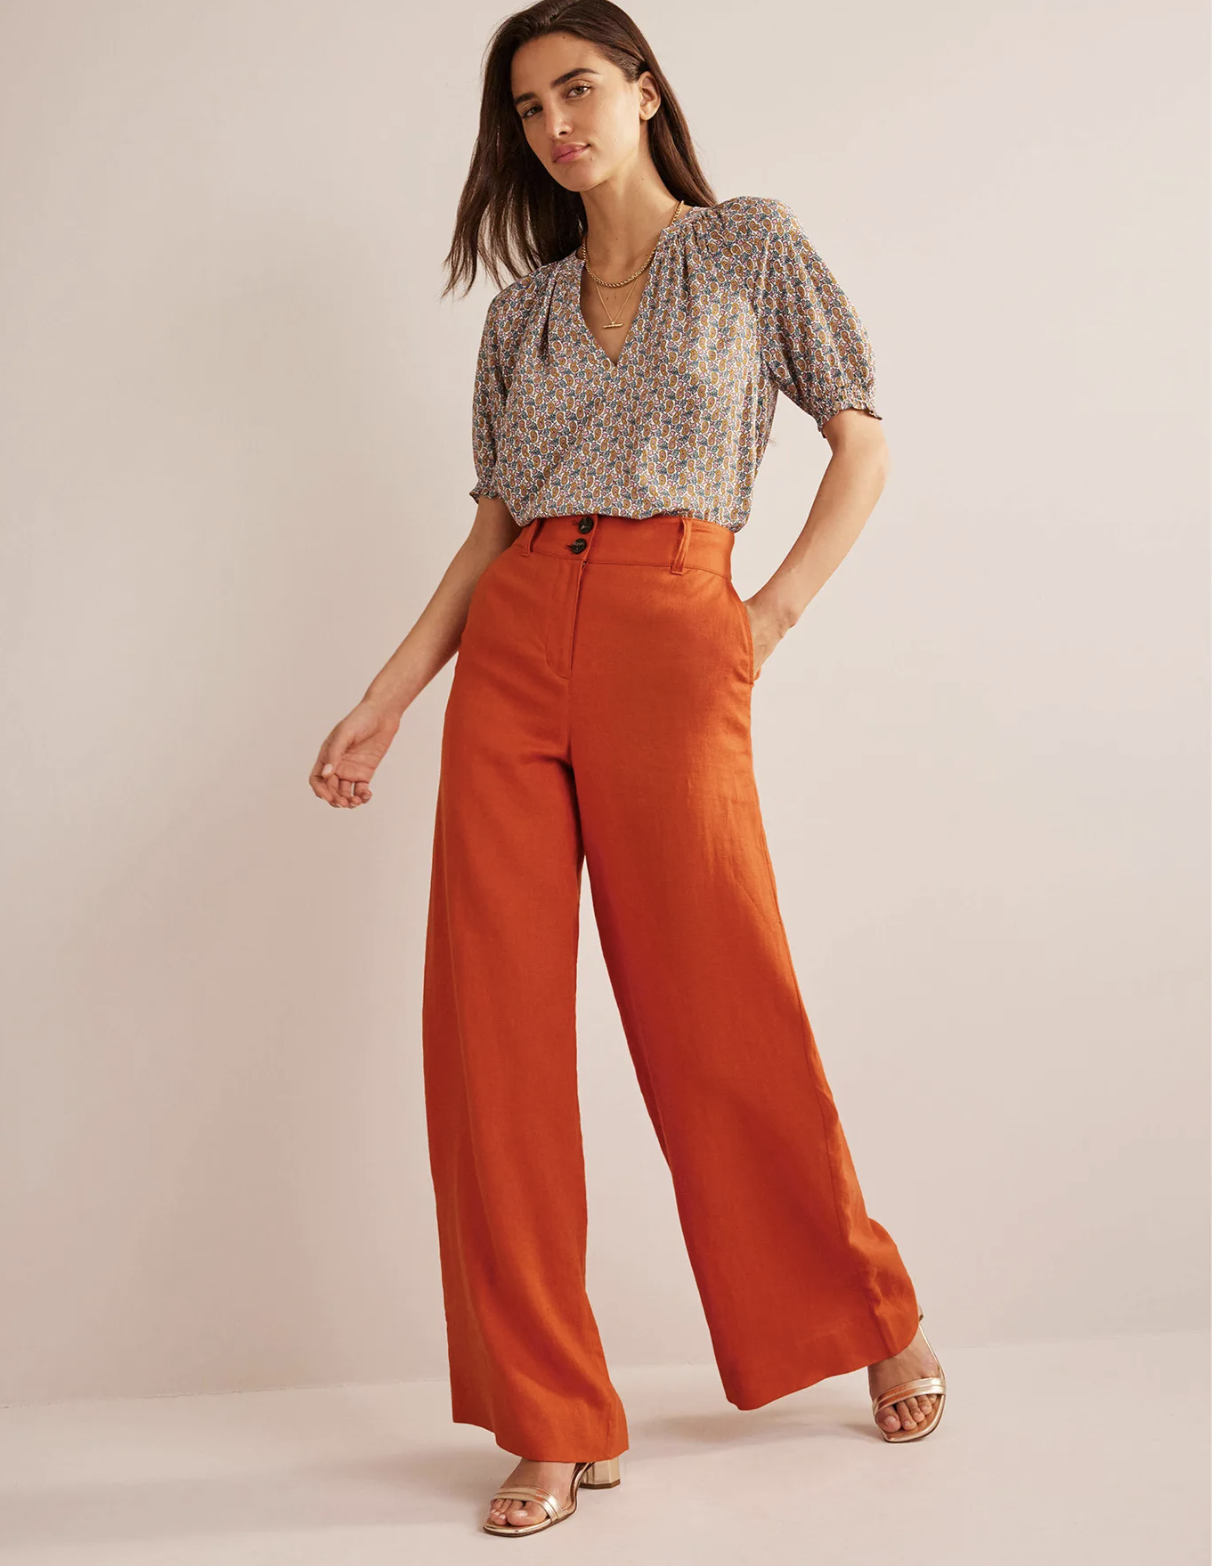 Boden Cavendish Trousers Rose Gold in Pink  Lyst UK